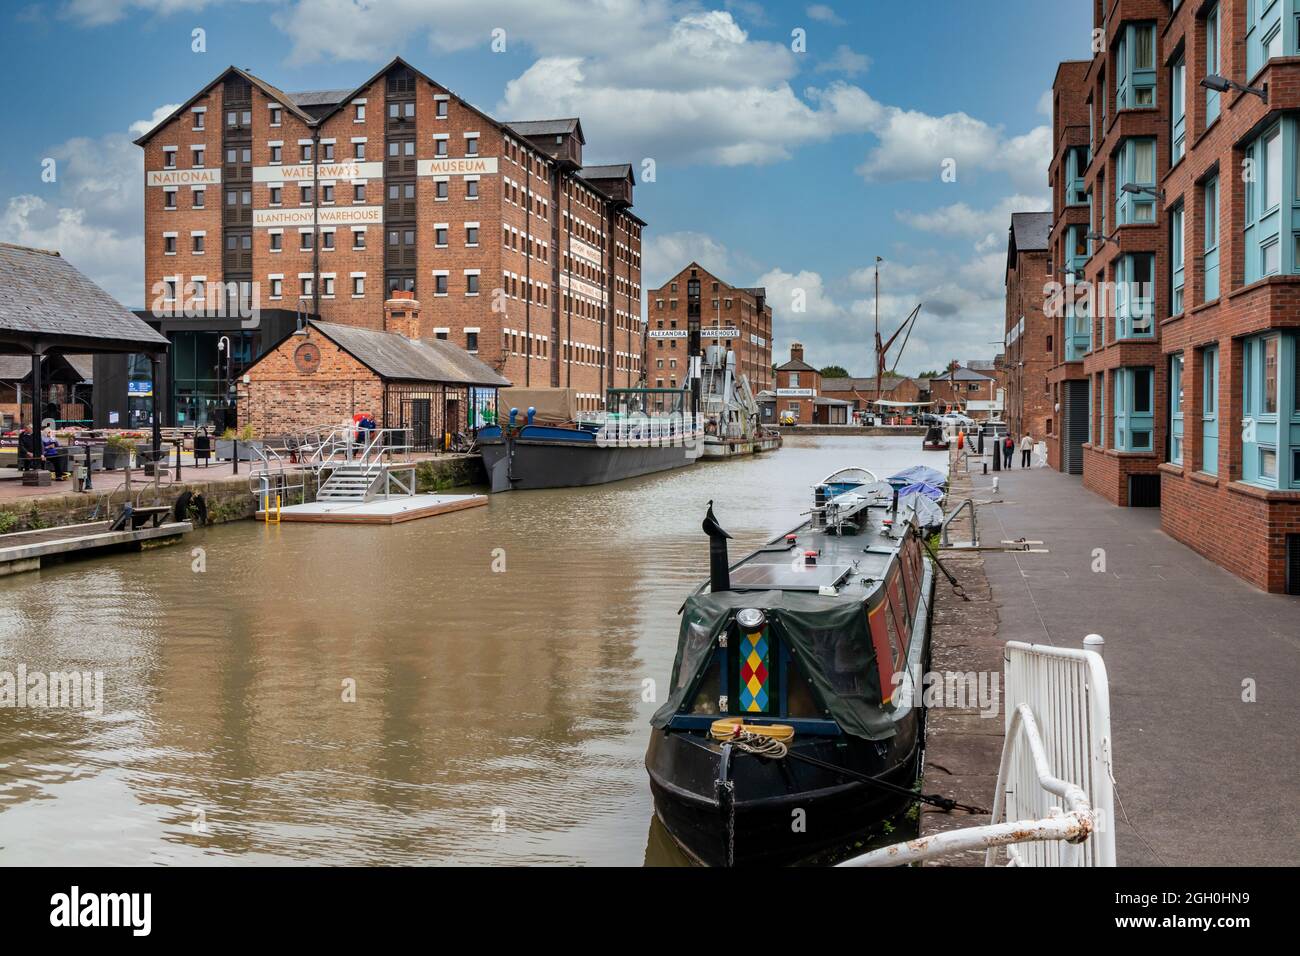 Victoria Basin with the National Waterways Museum in the background, Gloucester Docks, Gloucestershire, England, UK. Stock Photo